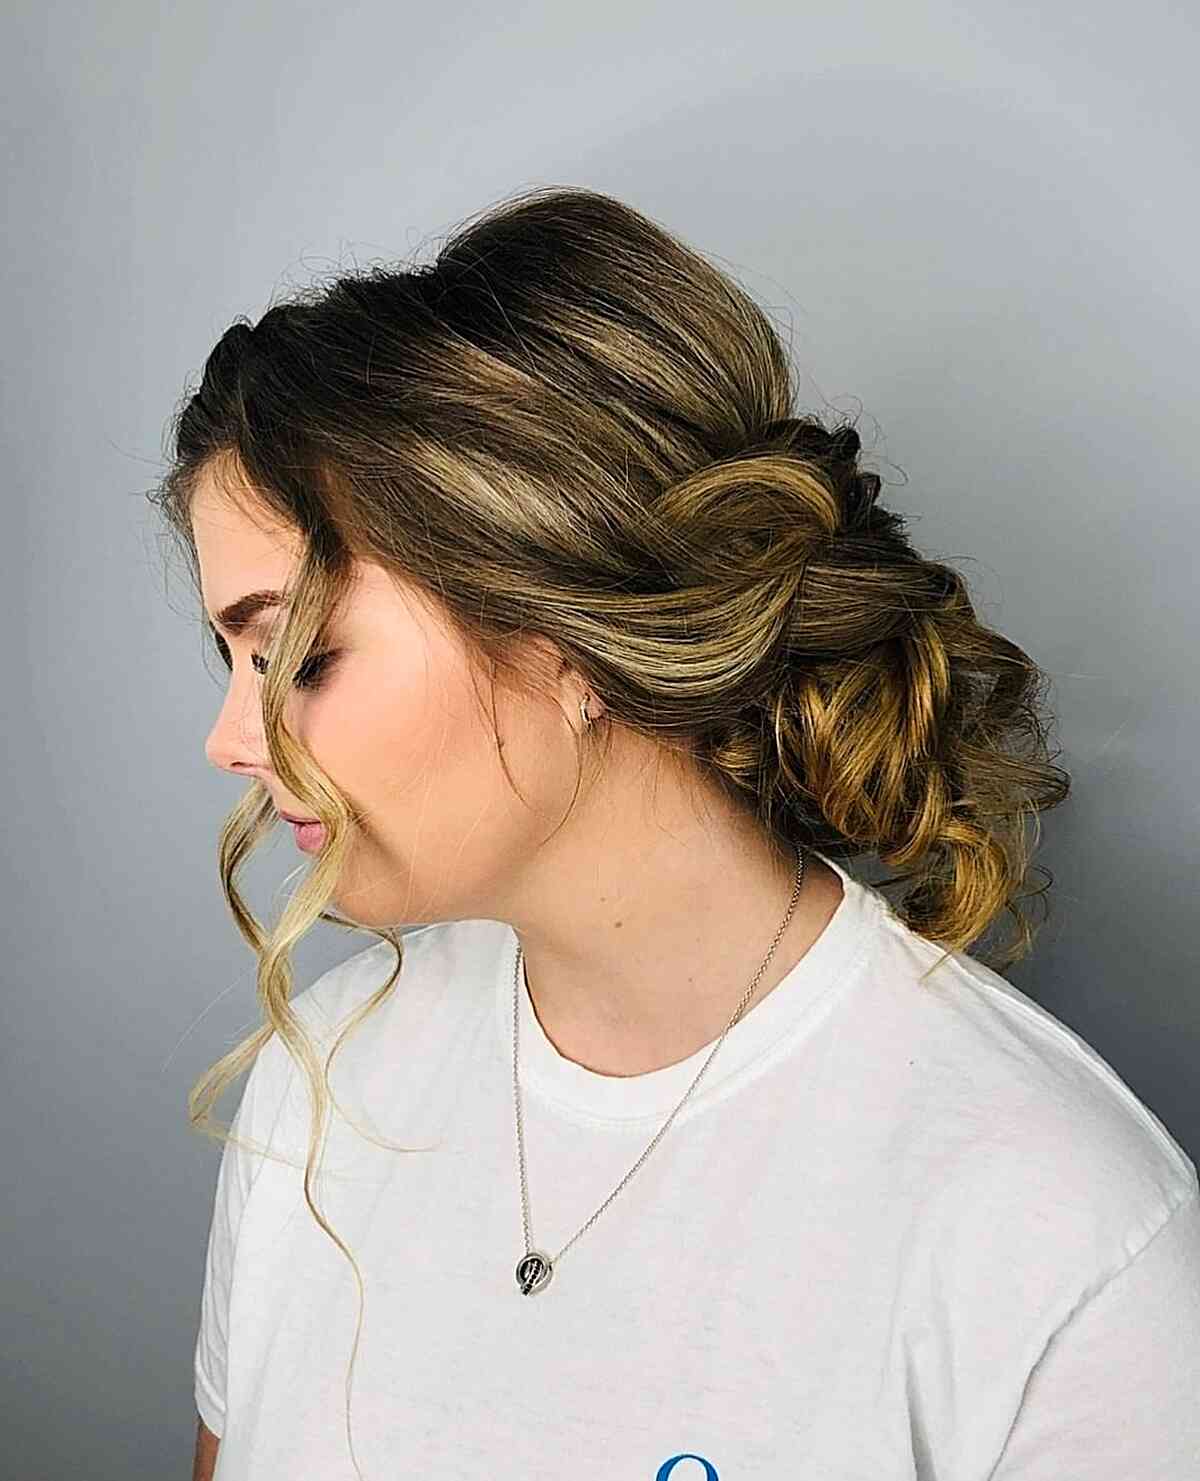 Graduation Thick Low Bun Hairstyle with Twists